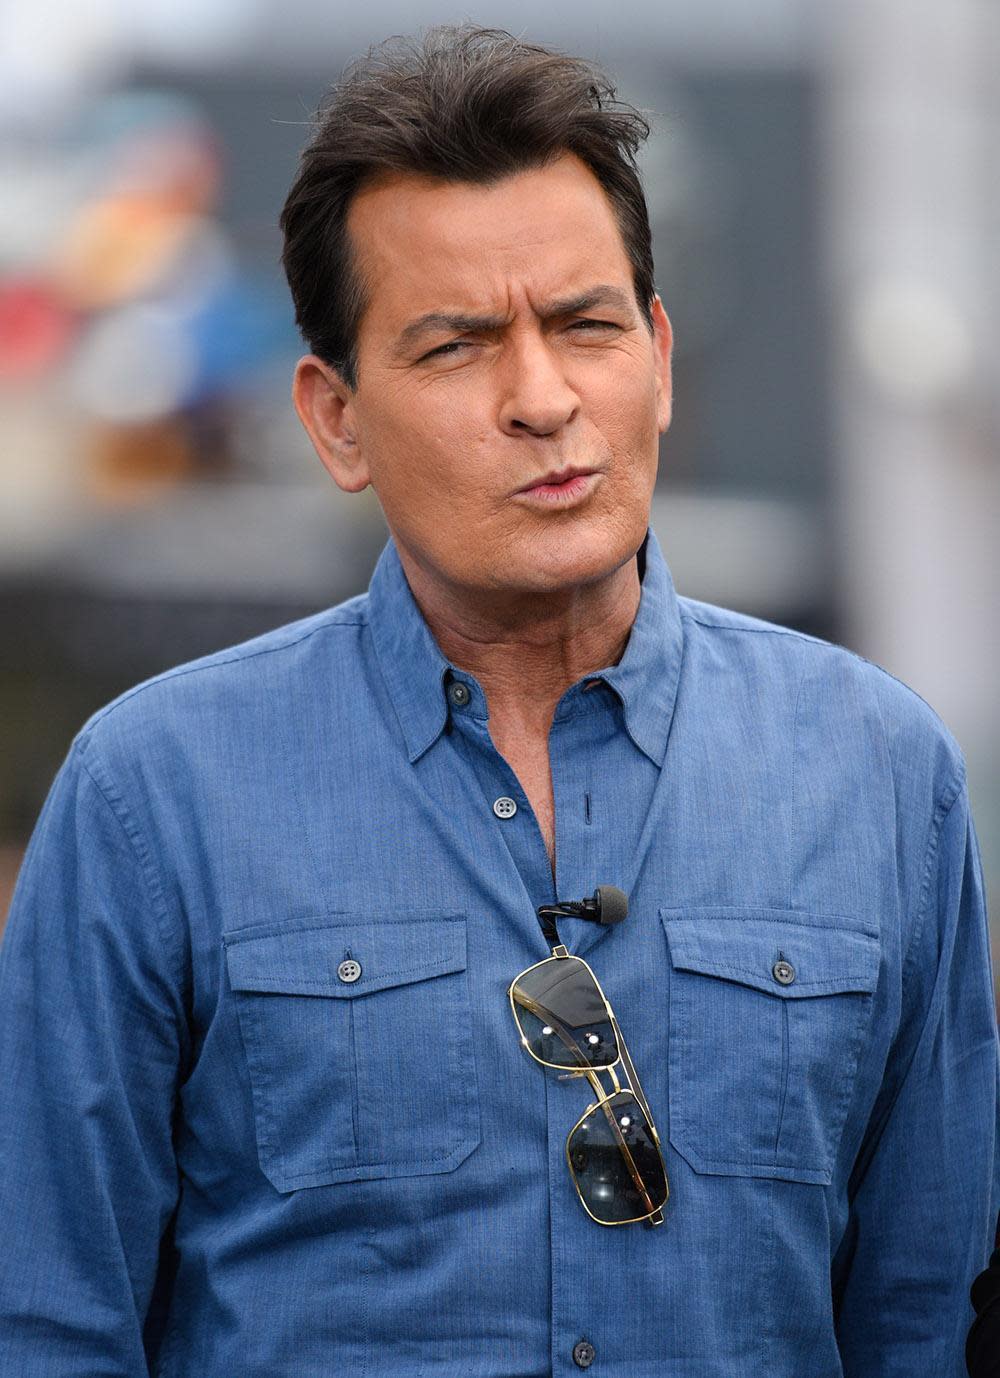 Charlie Sheen Reveals He is HIV Positive